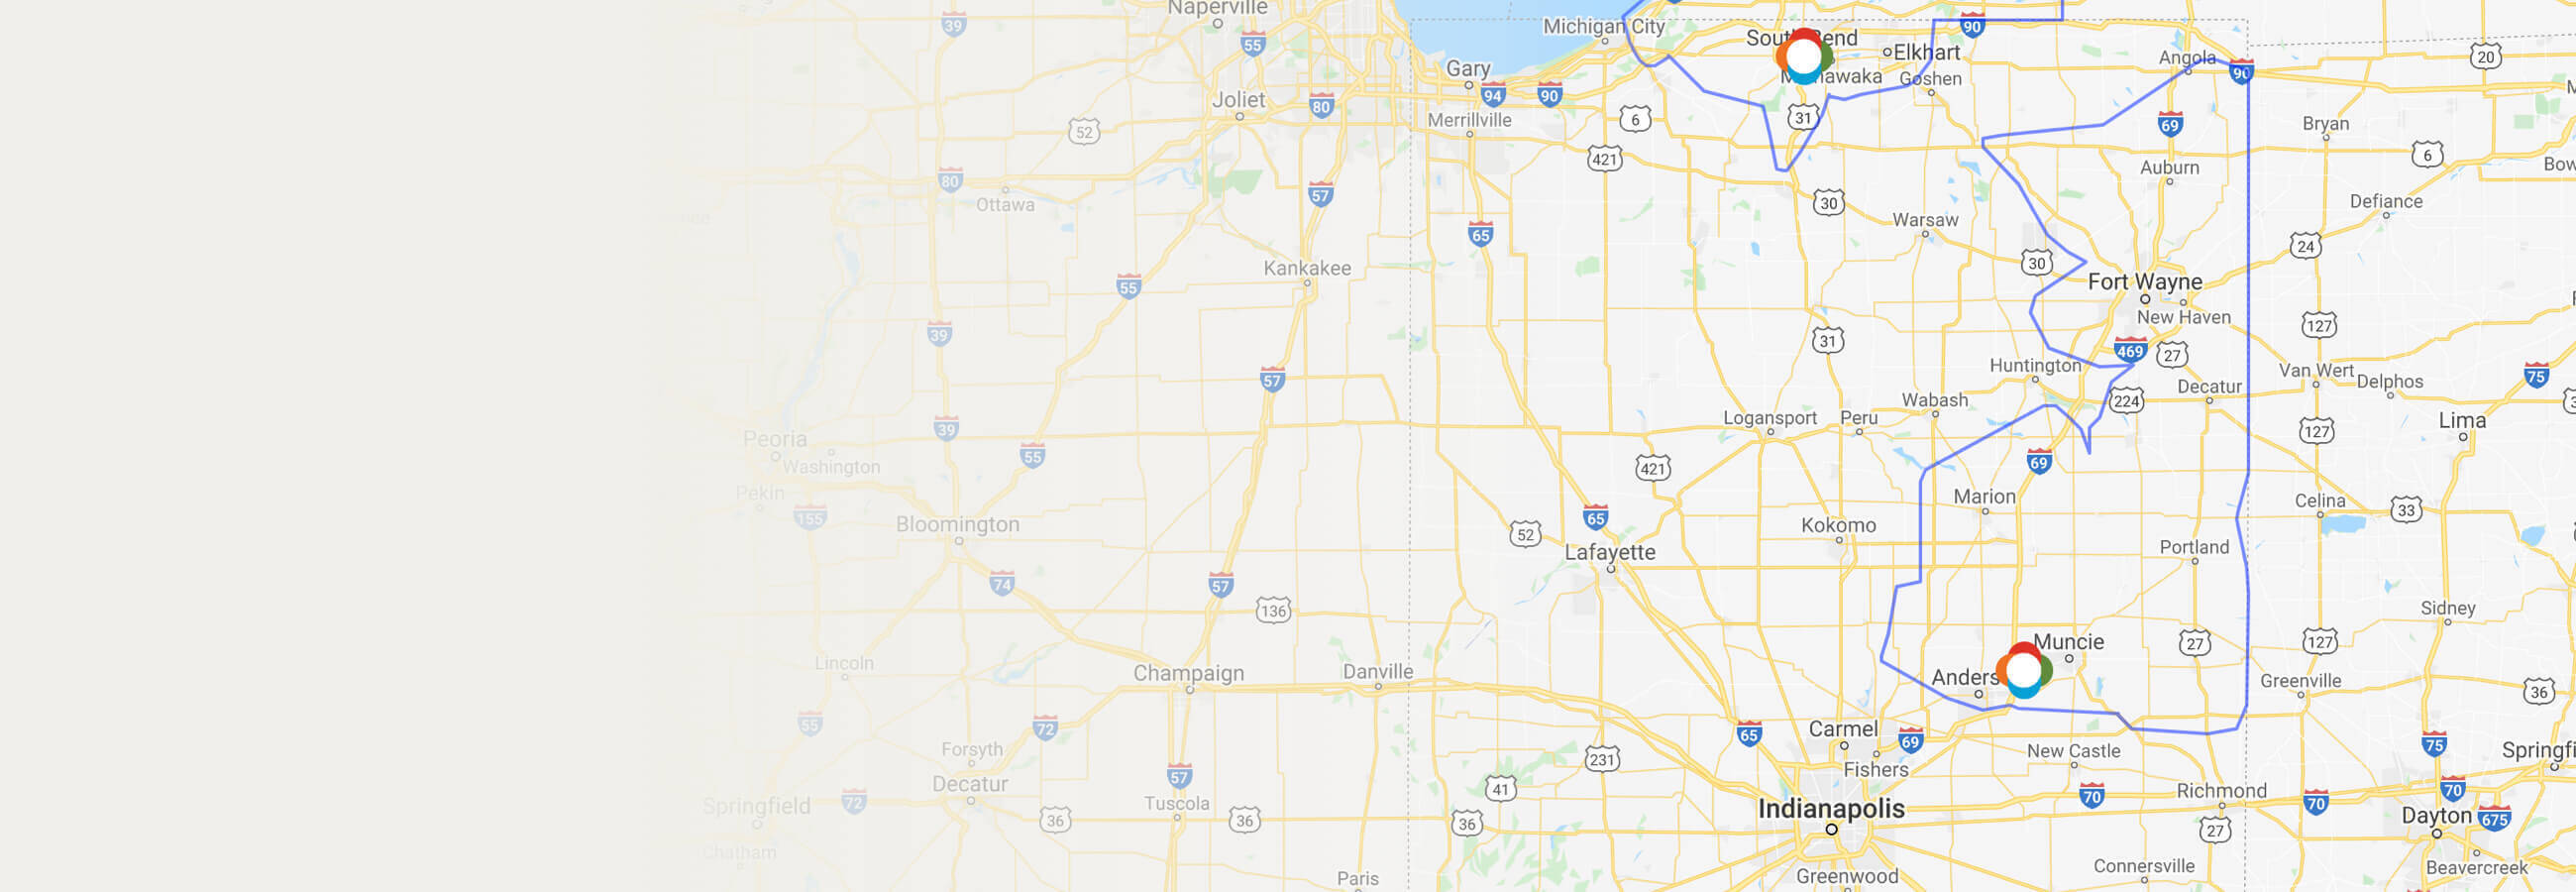 https://www.indianamichiganpower.com/lib/images/outages/outage-map-indiana-michigan2x.jpg